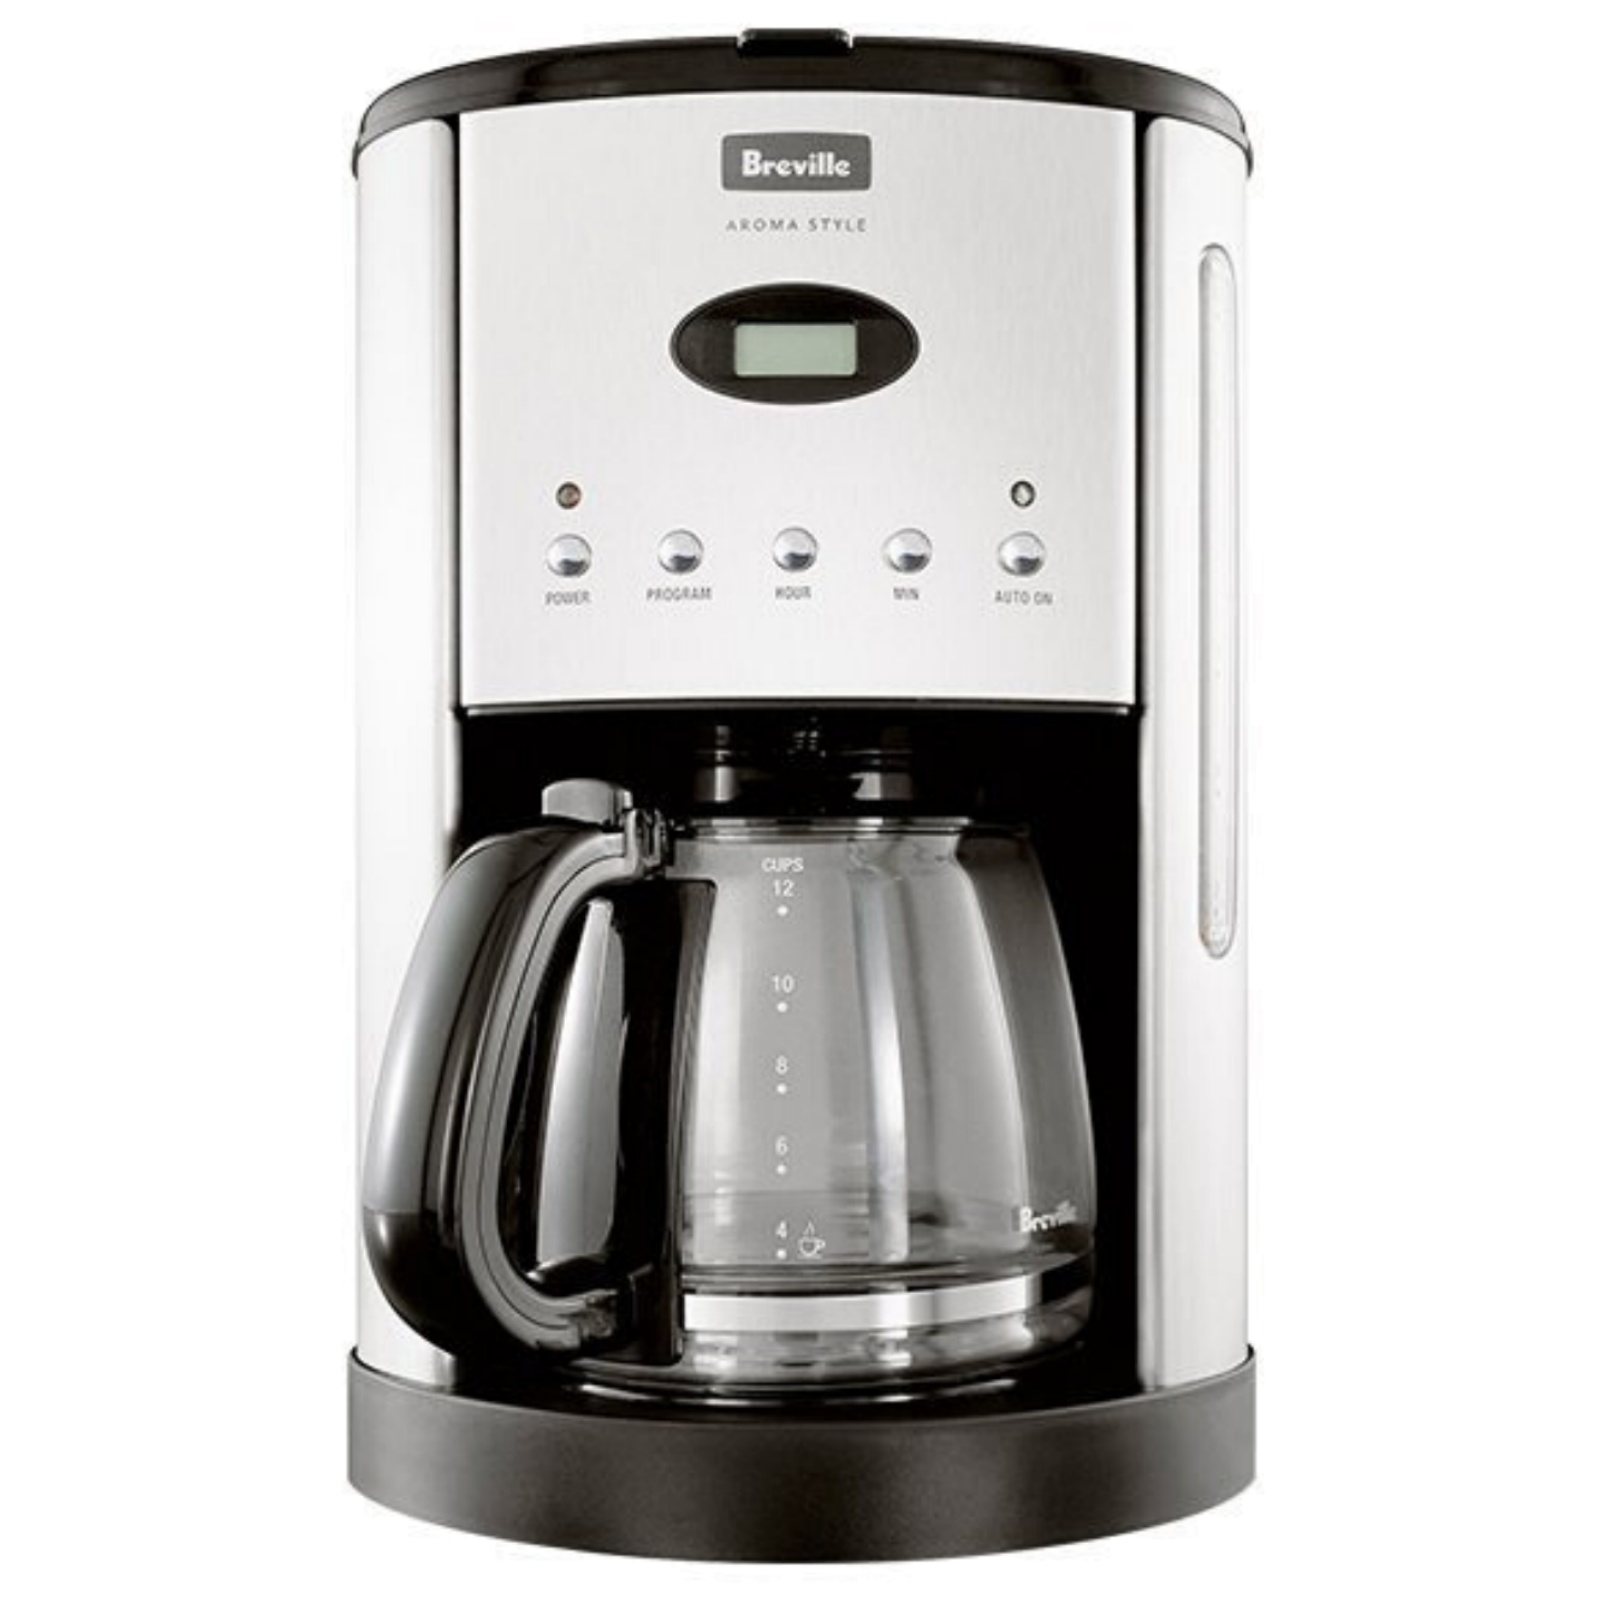 Breville Aroma Style Coffee Maker